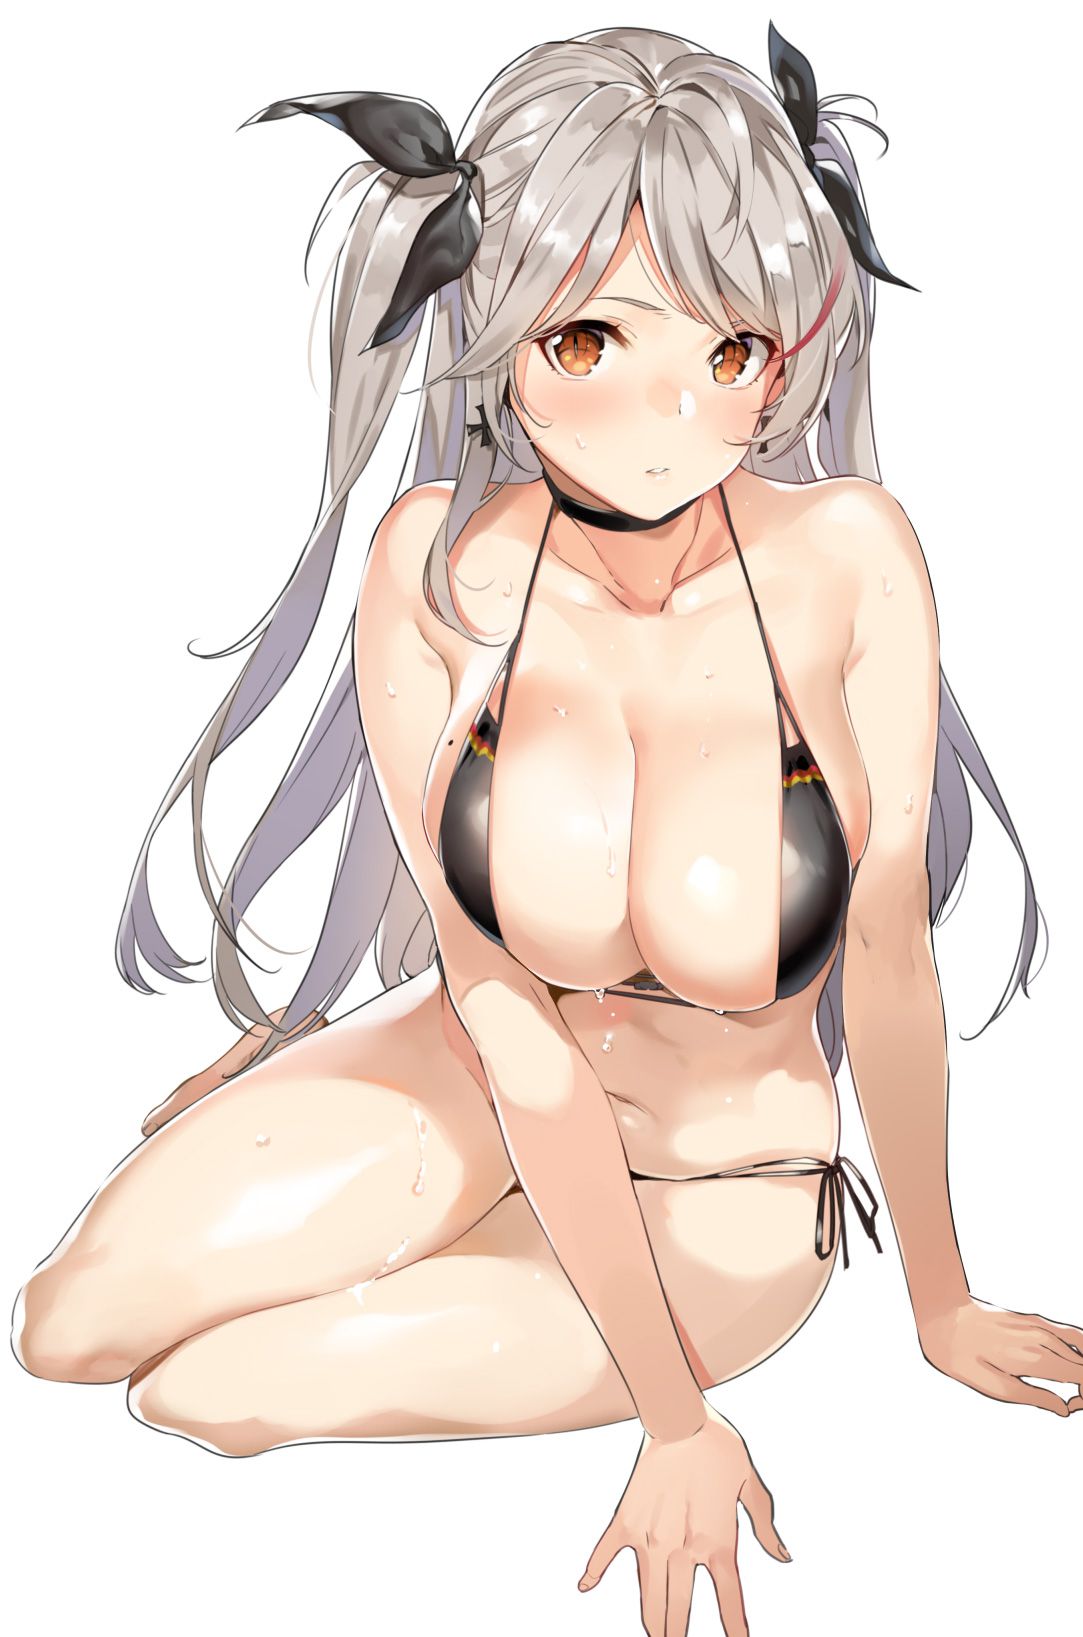 Secondary image of a silver-haired girl that 4 50 photos [Ero/non-erotic] 33